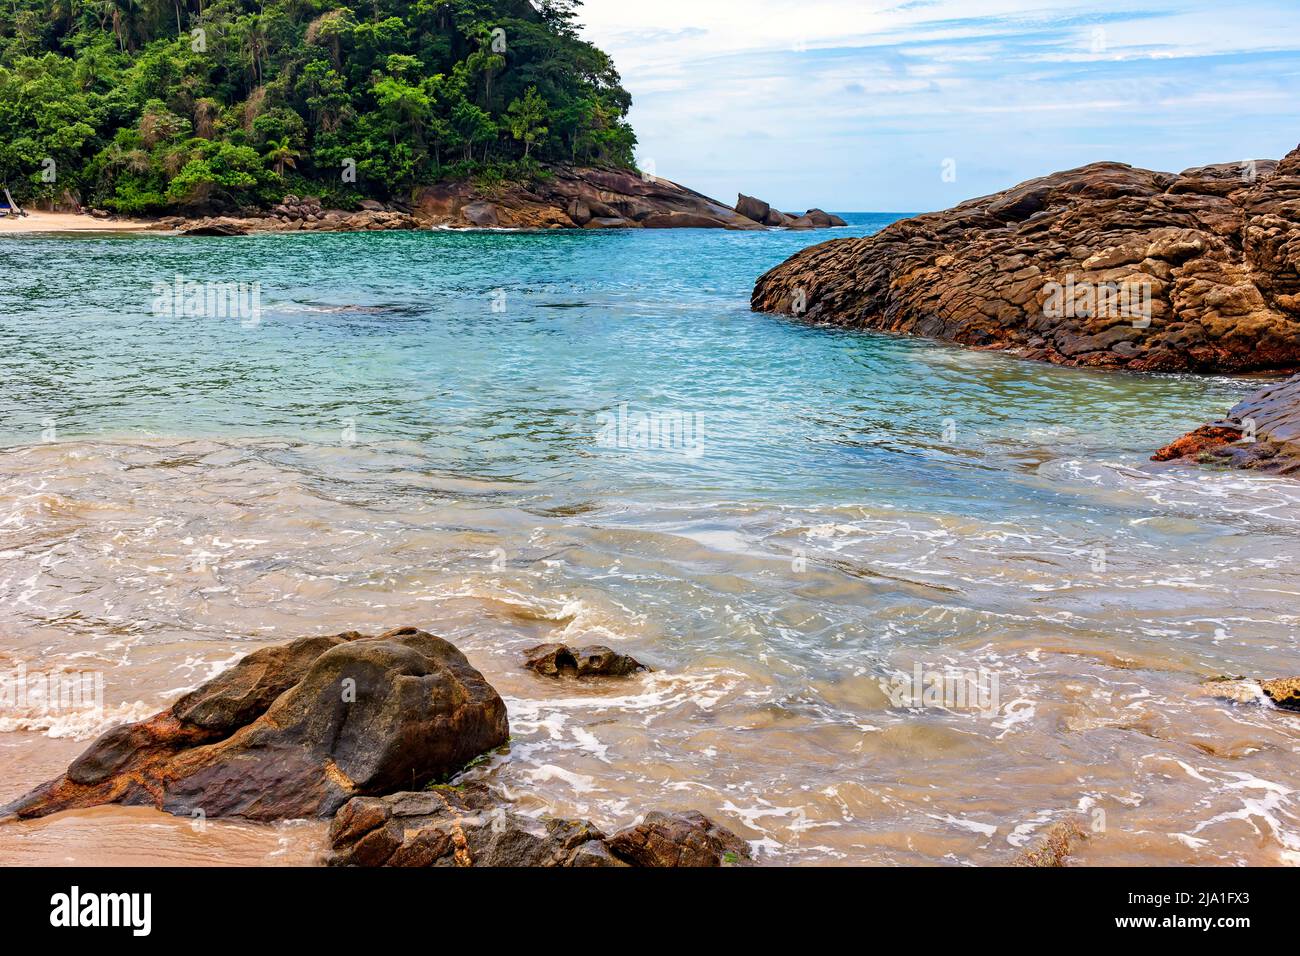 Untouched and deserted beach, surrounded by rainforest with calm, vividly colored waters in Trindade, municipality of Paraty, Rio de Janeiro Stock Photo